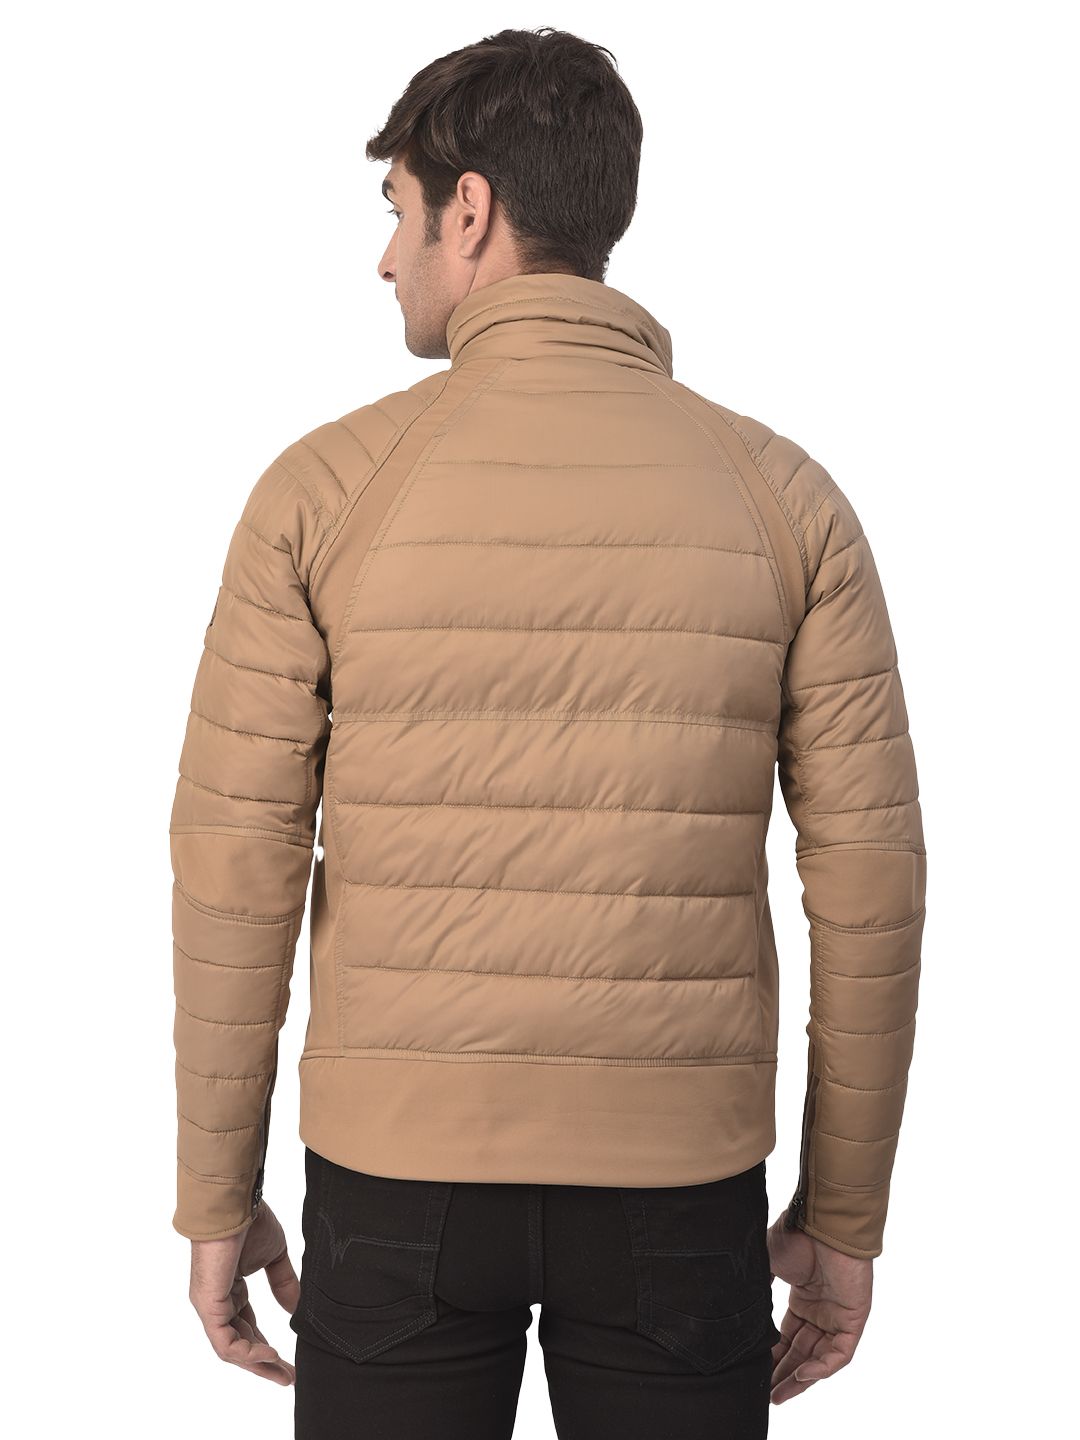 Buy woodland jackets for mens winter wear in India @ Limeroad